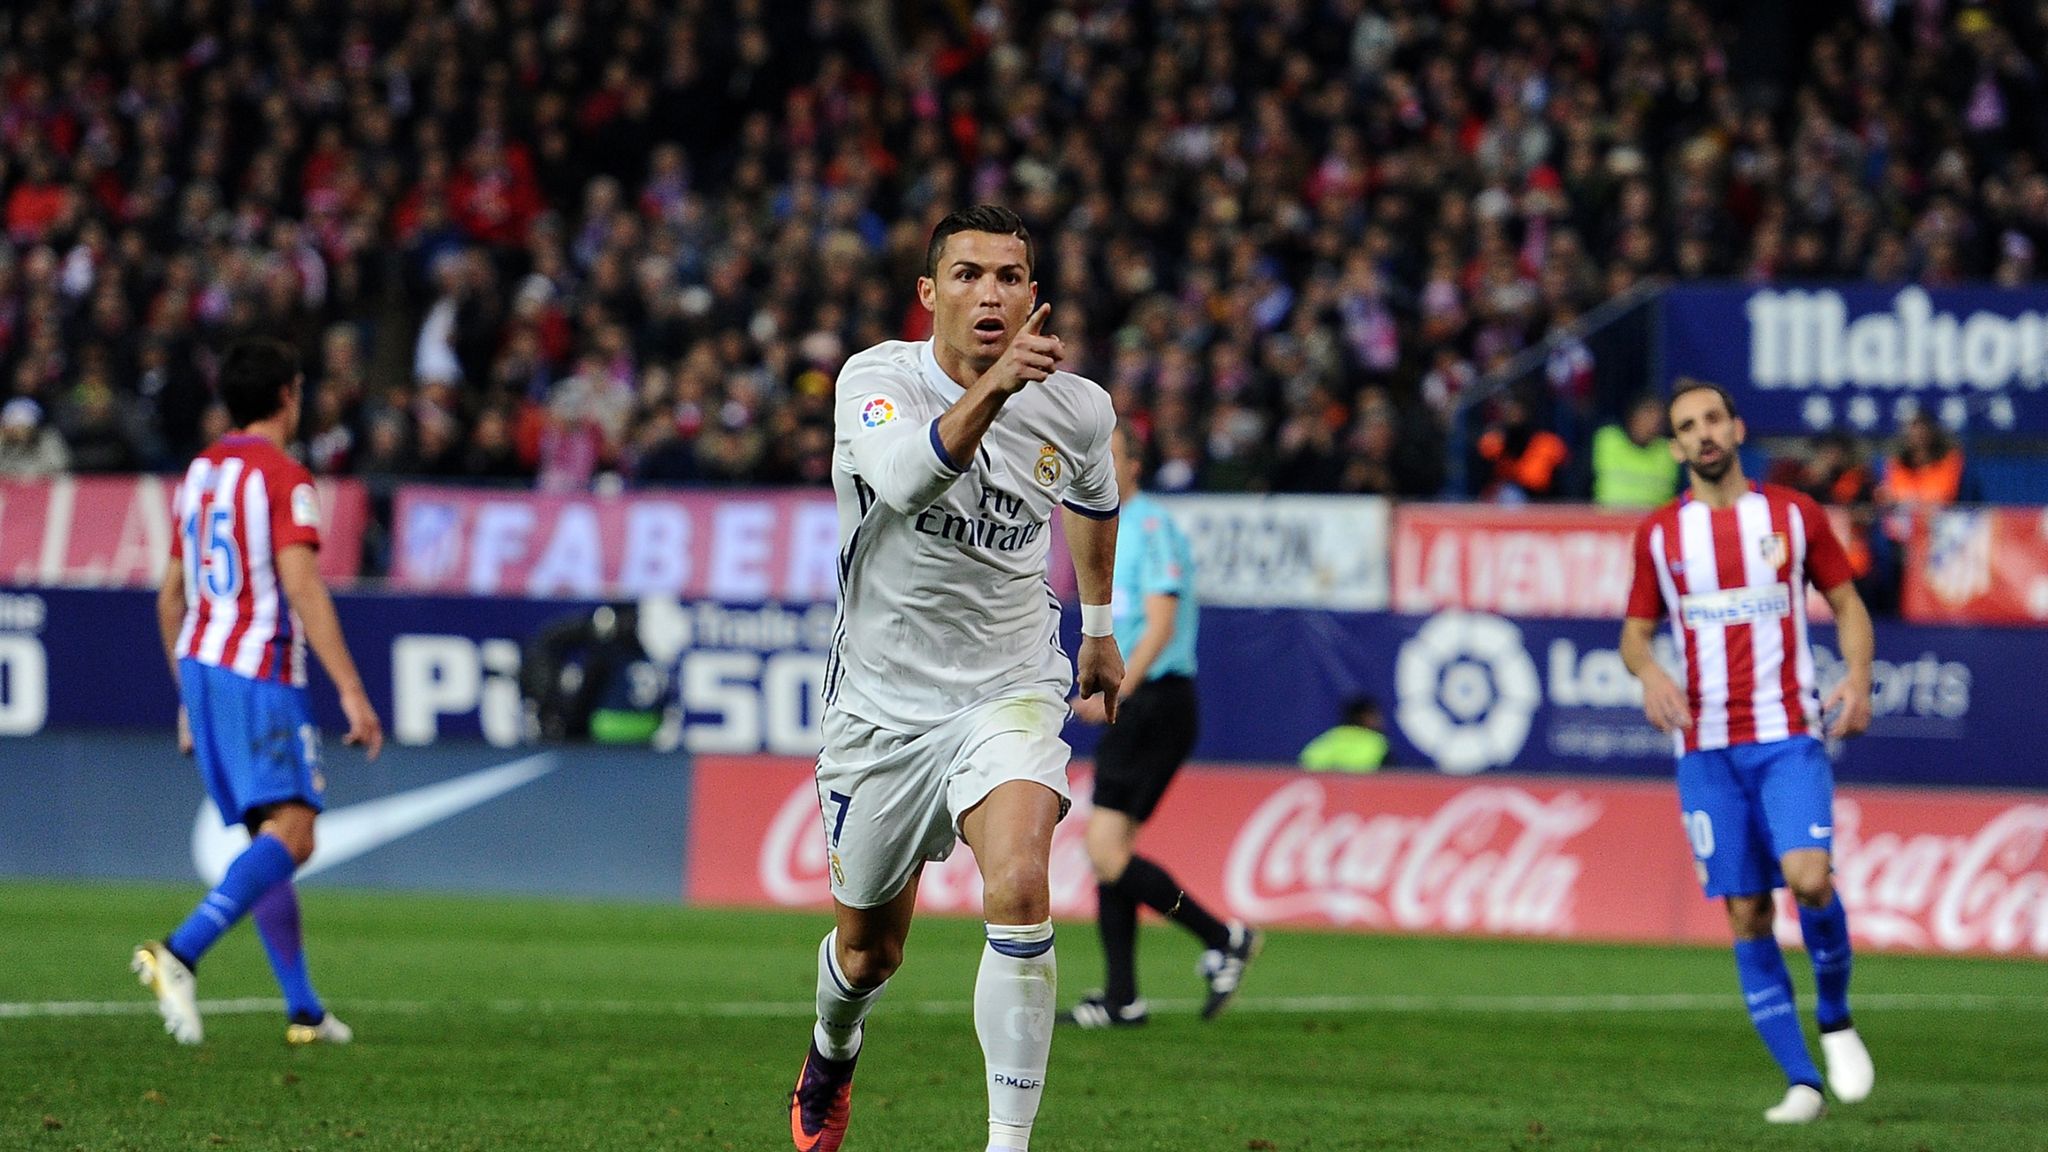 Real Madrid's Cristiano Ronaldo was huge Ballon d'Or winner ahead of Lionel Mess